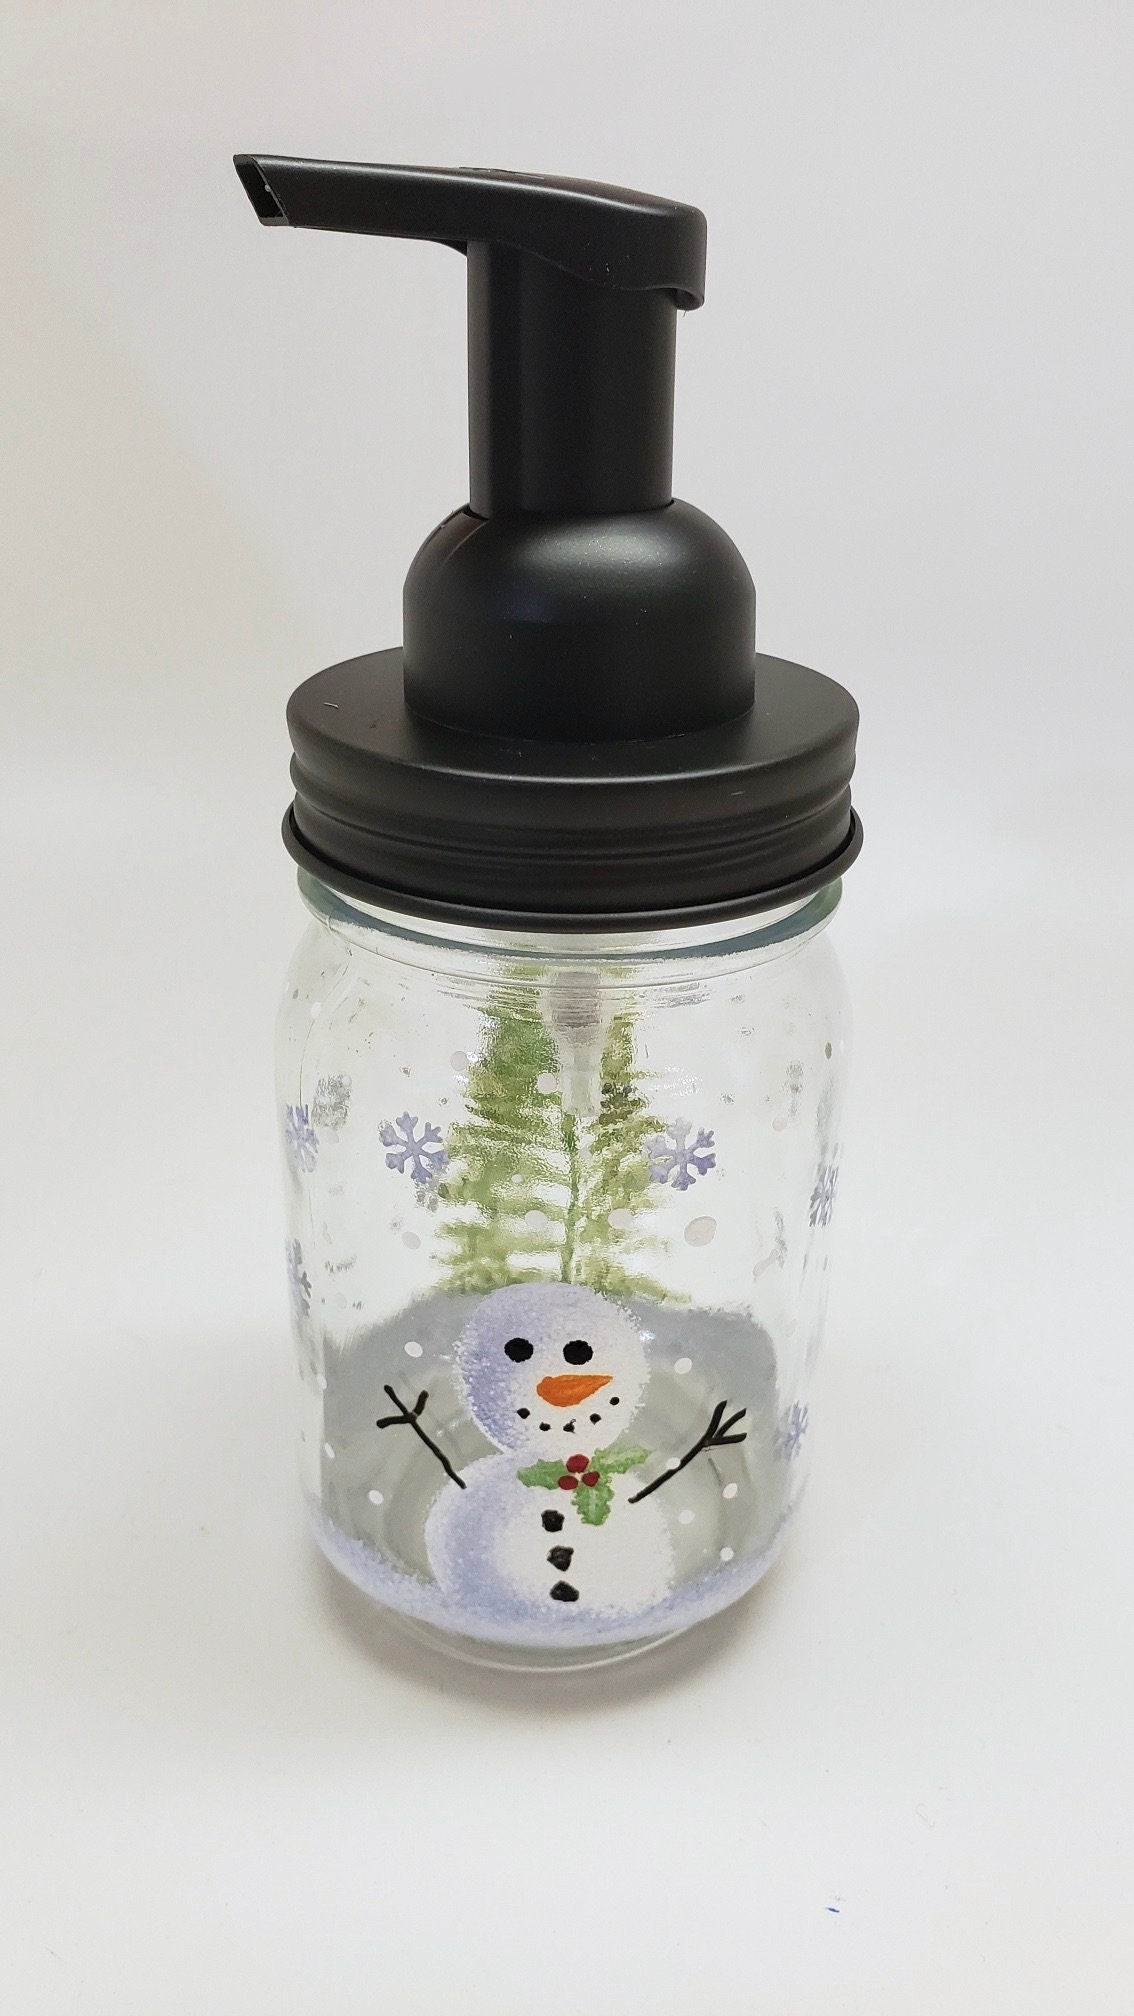 Hand painted Snowman Mason Jar Soap, Lotion or Hand Sanitizer Dispenser your Choice of Plastic, Stainless Steel, or Foaming pump